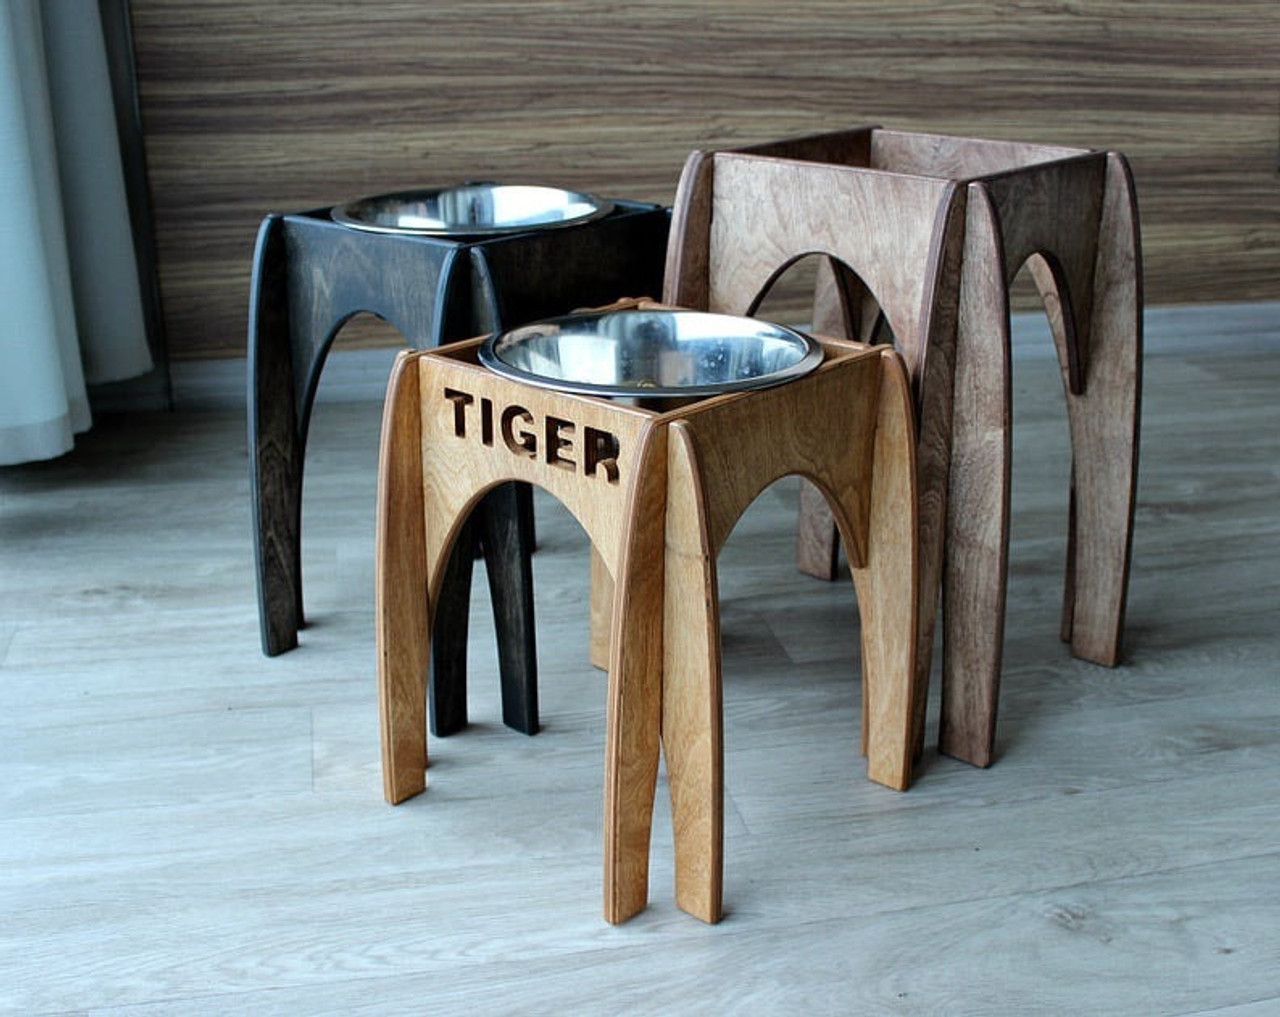 https://cdn11.bigcommerce.com/s-zy7iaurt44/images/stencil/1280x1280/products/1892/7878/Elevated_Dog_Bowls_-_Stand_Arch__74948.1645949509.JPG?c=2